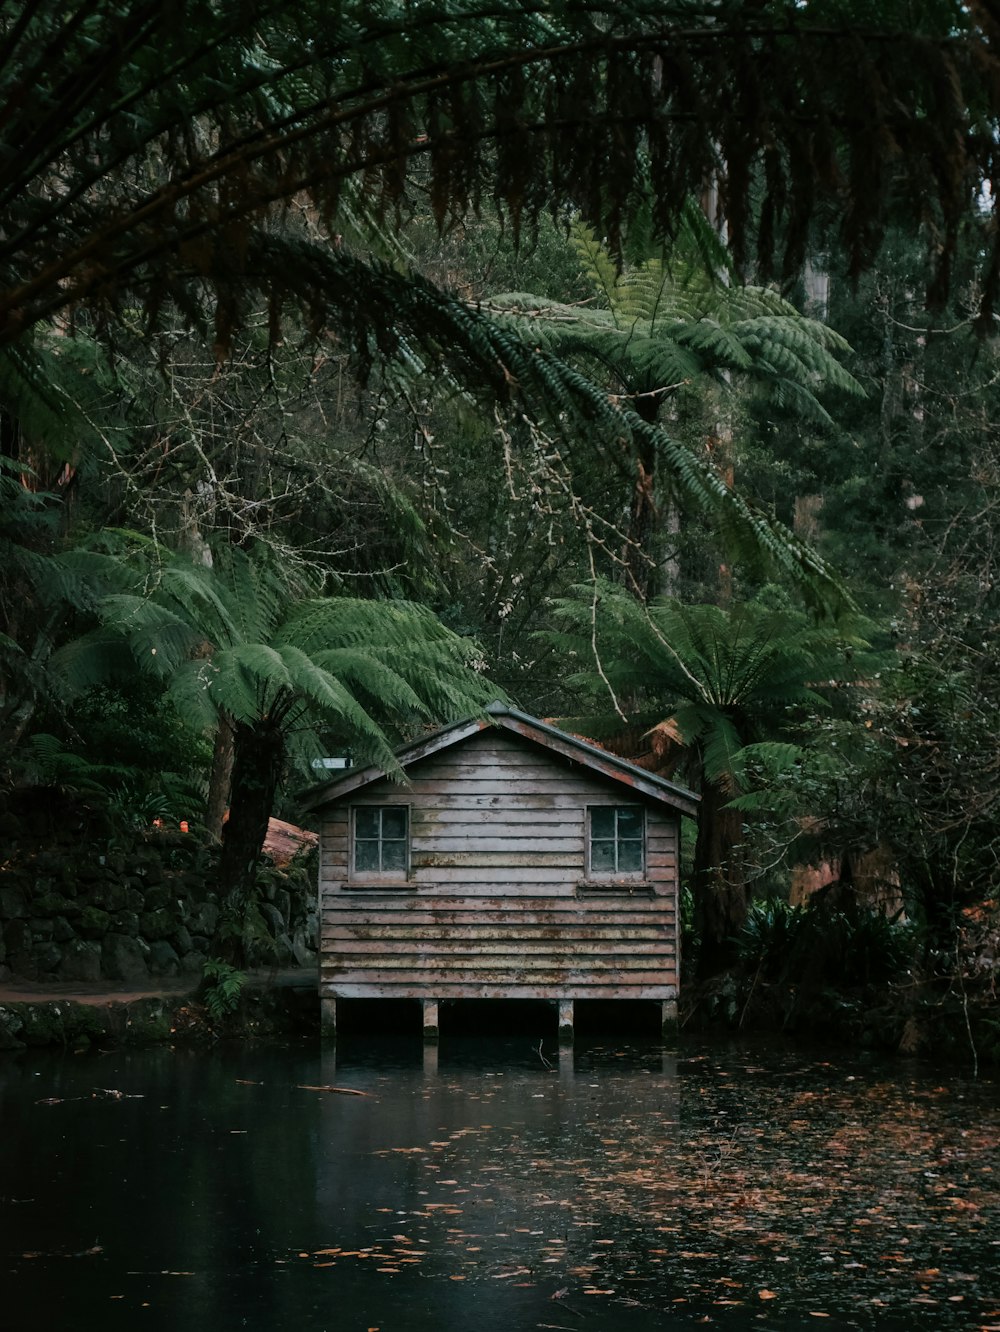 brown wooden house near body of water